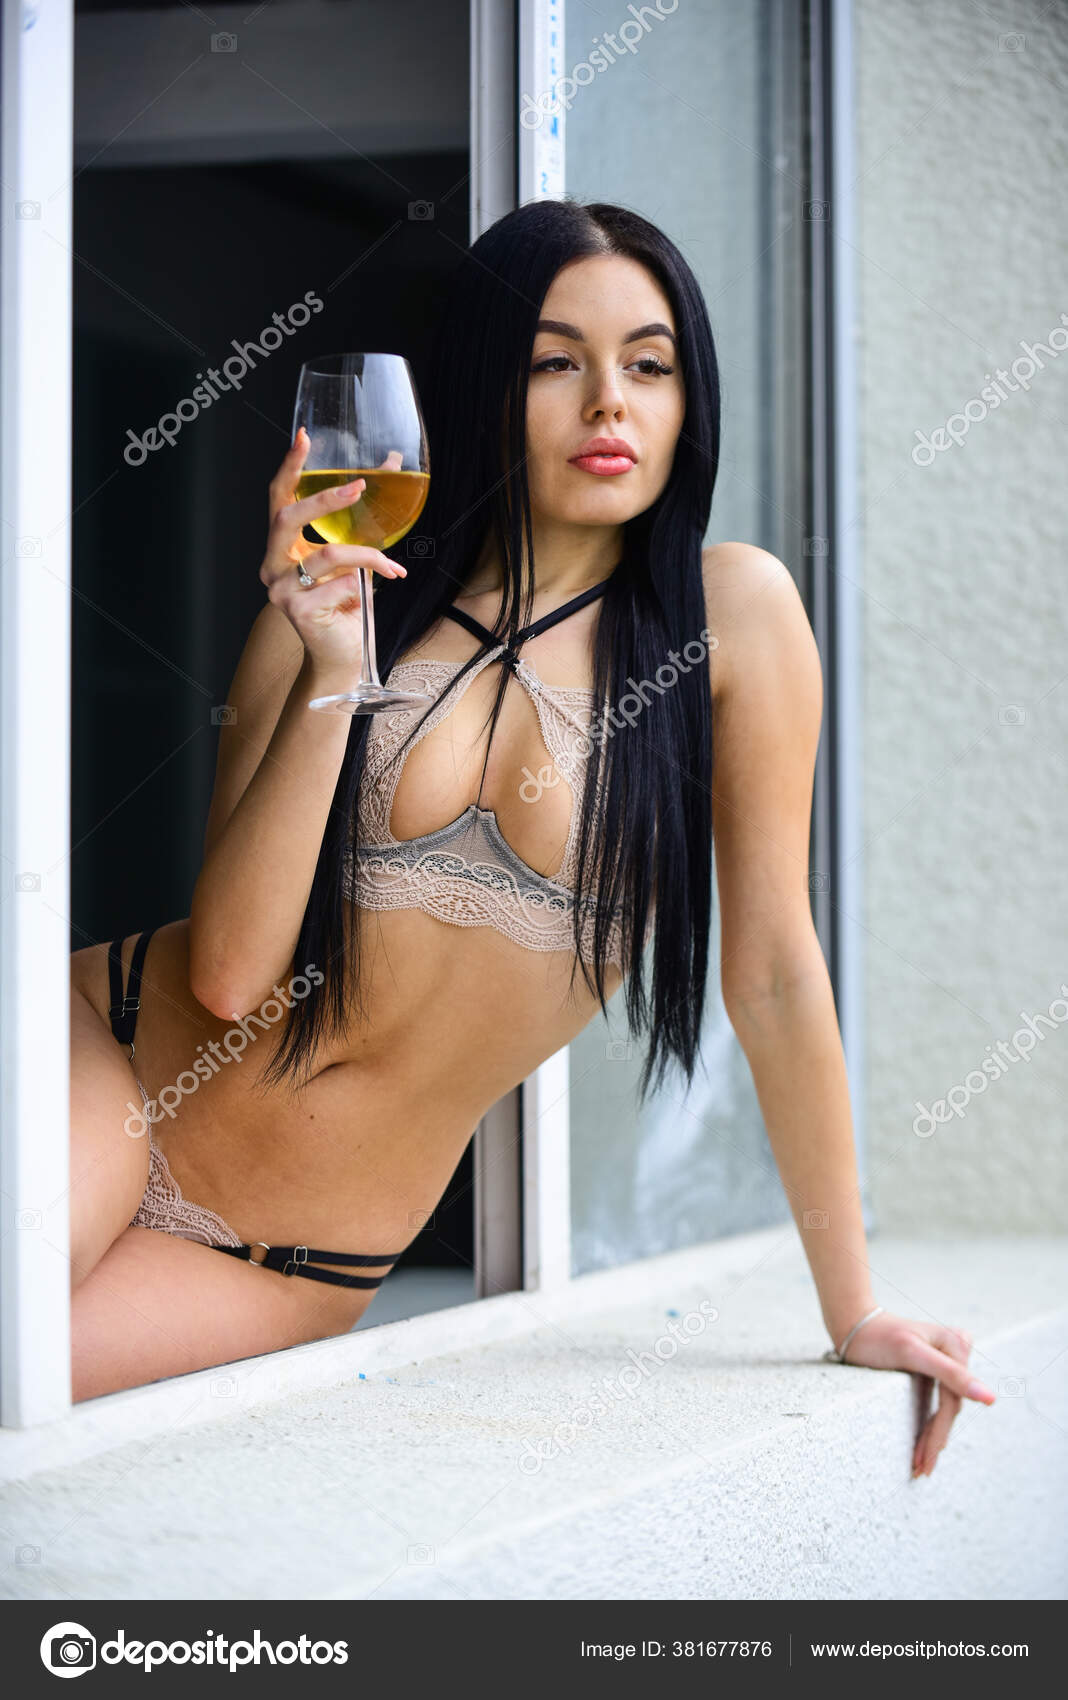 Colors Ford Model Sexy Woman Drinking